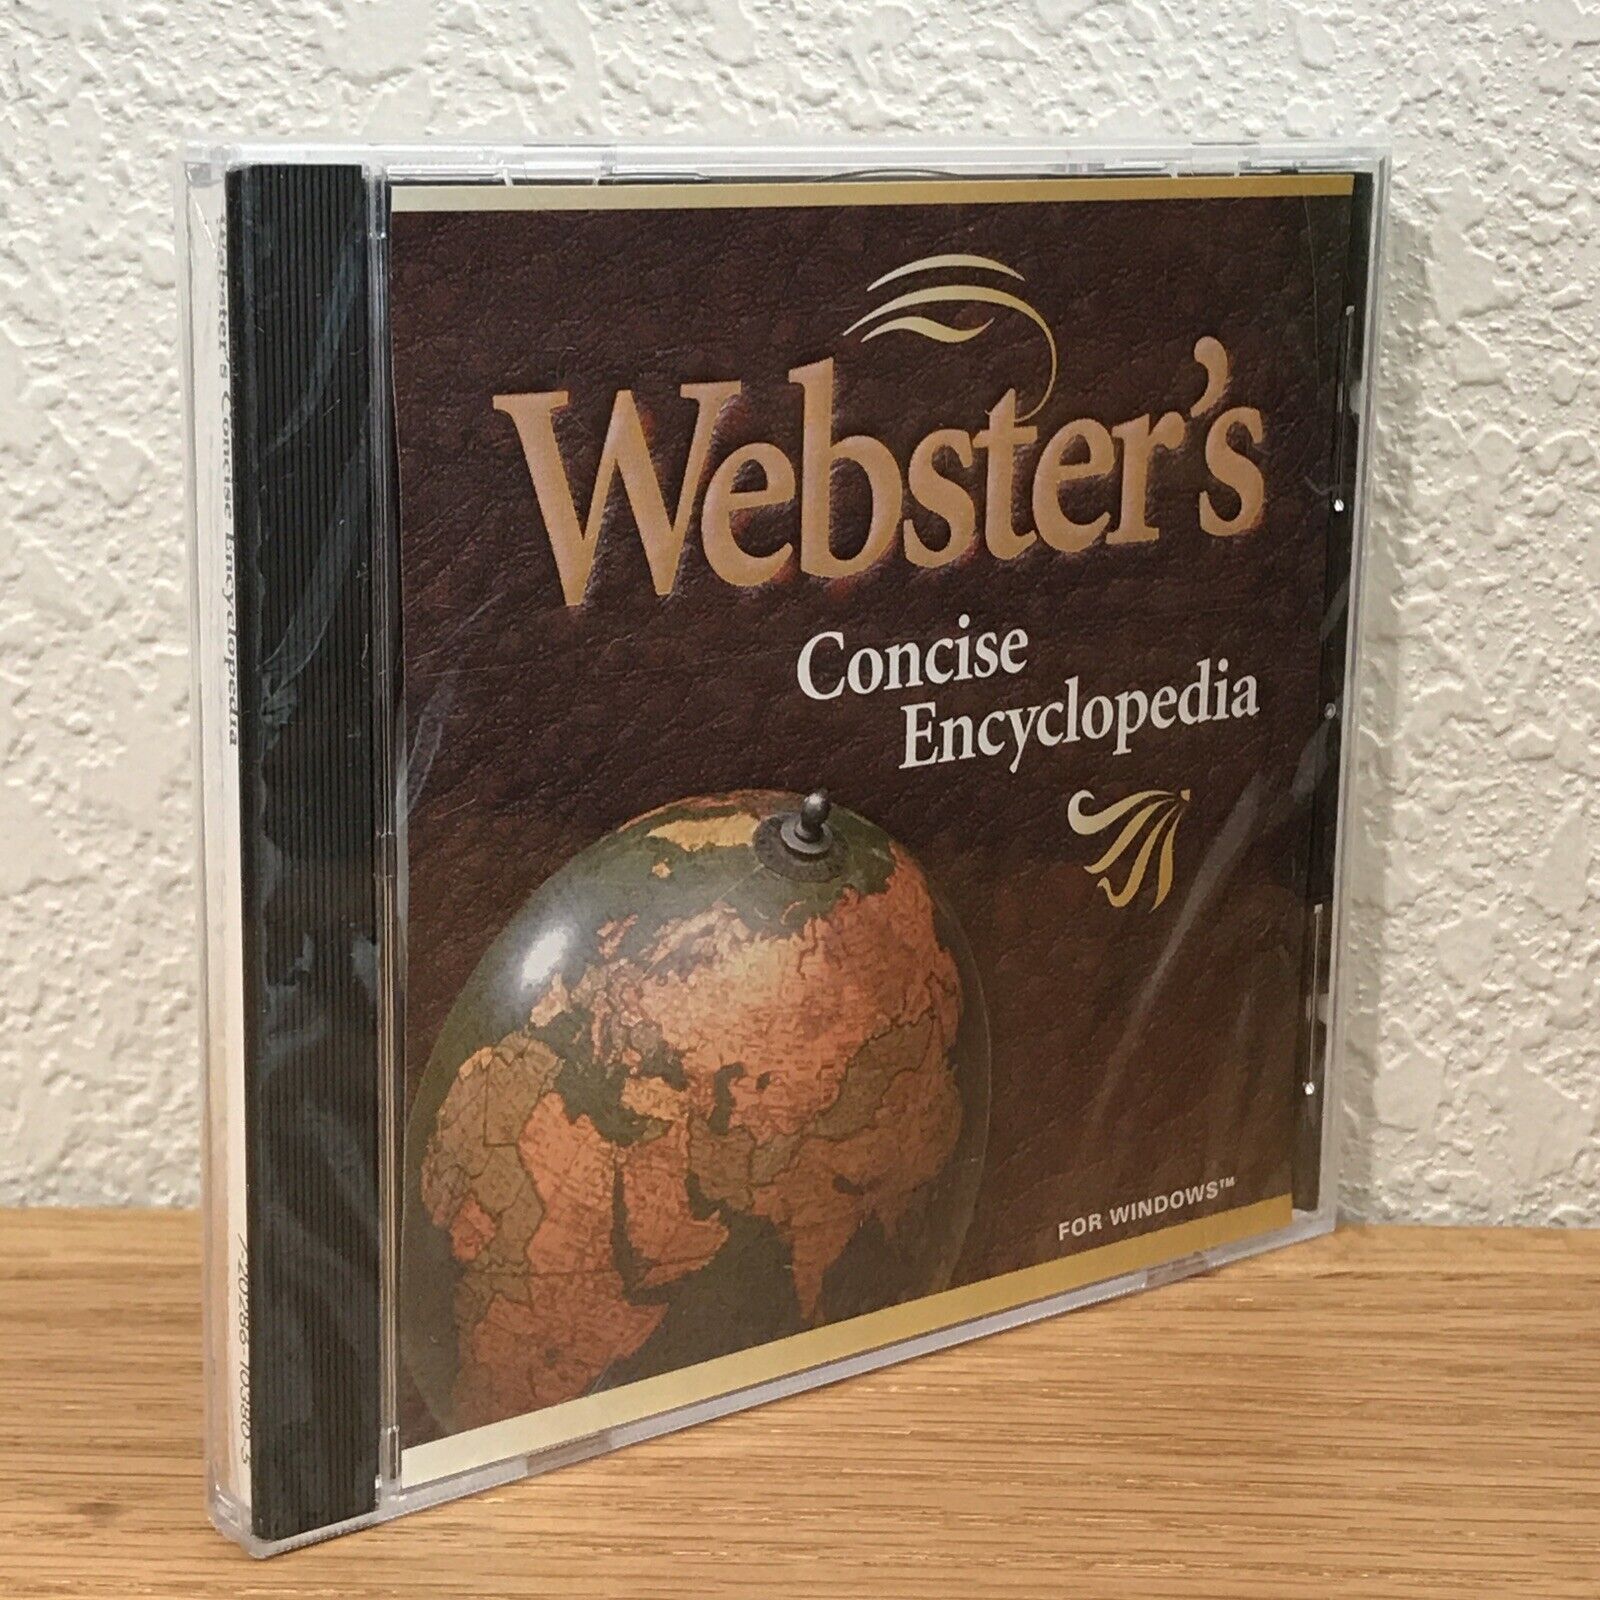 Webster's Concise Encyclopedia PC CD-ROM 1996 Windows 95/3.1 720286103805 SEALED